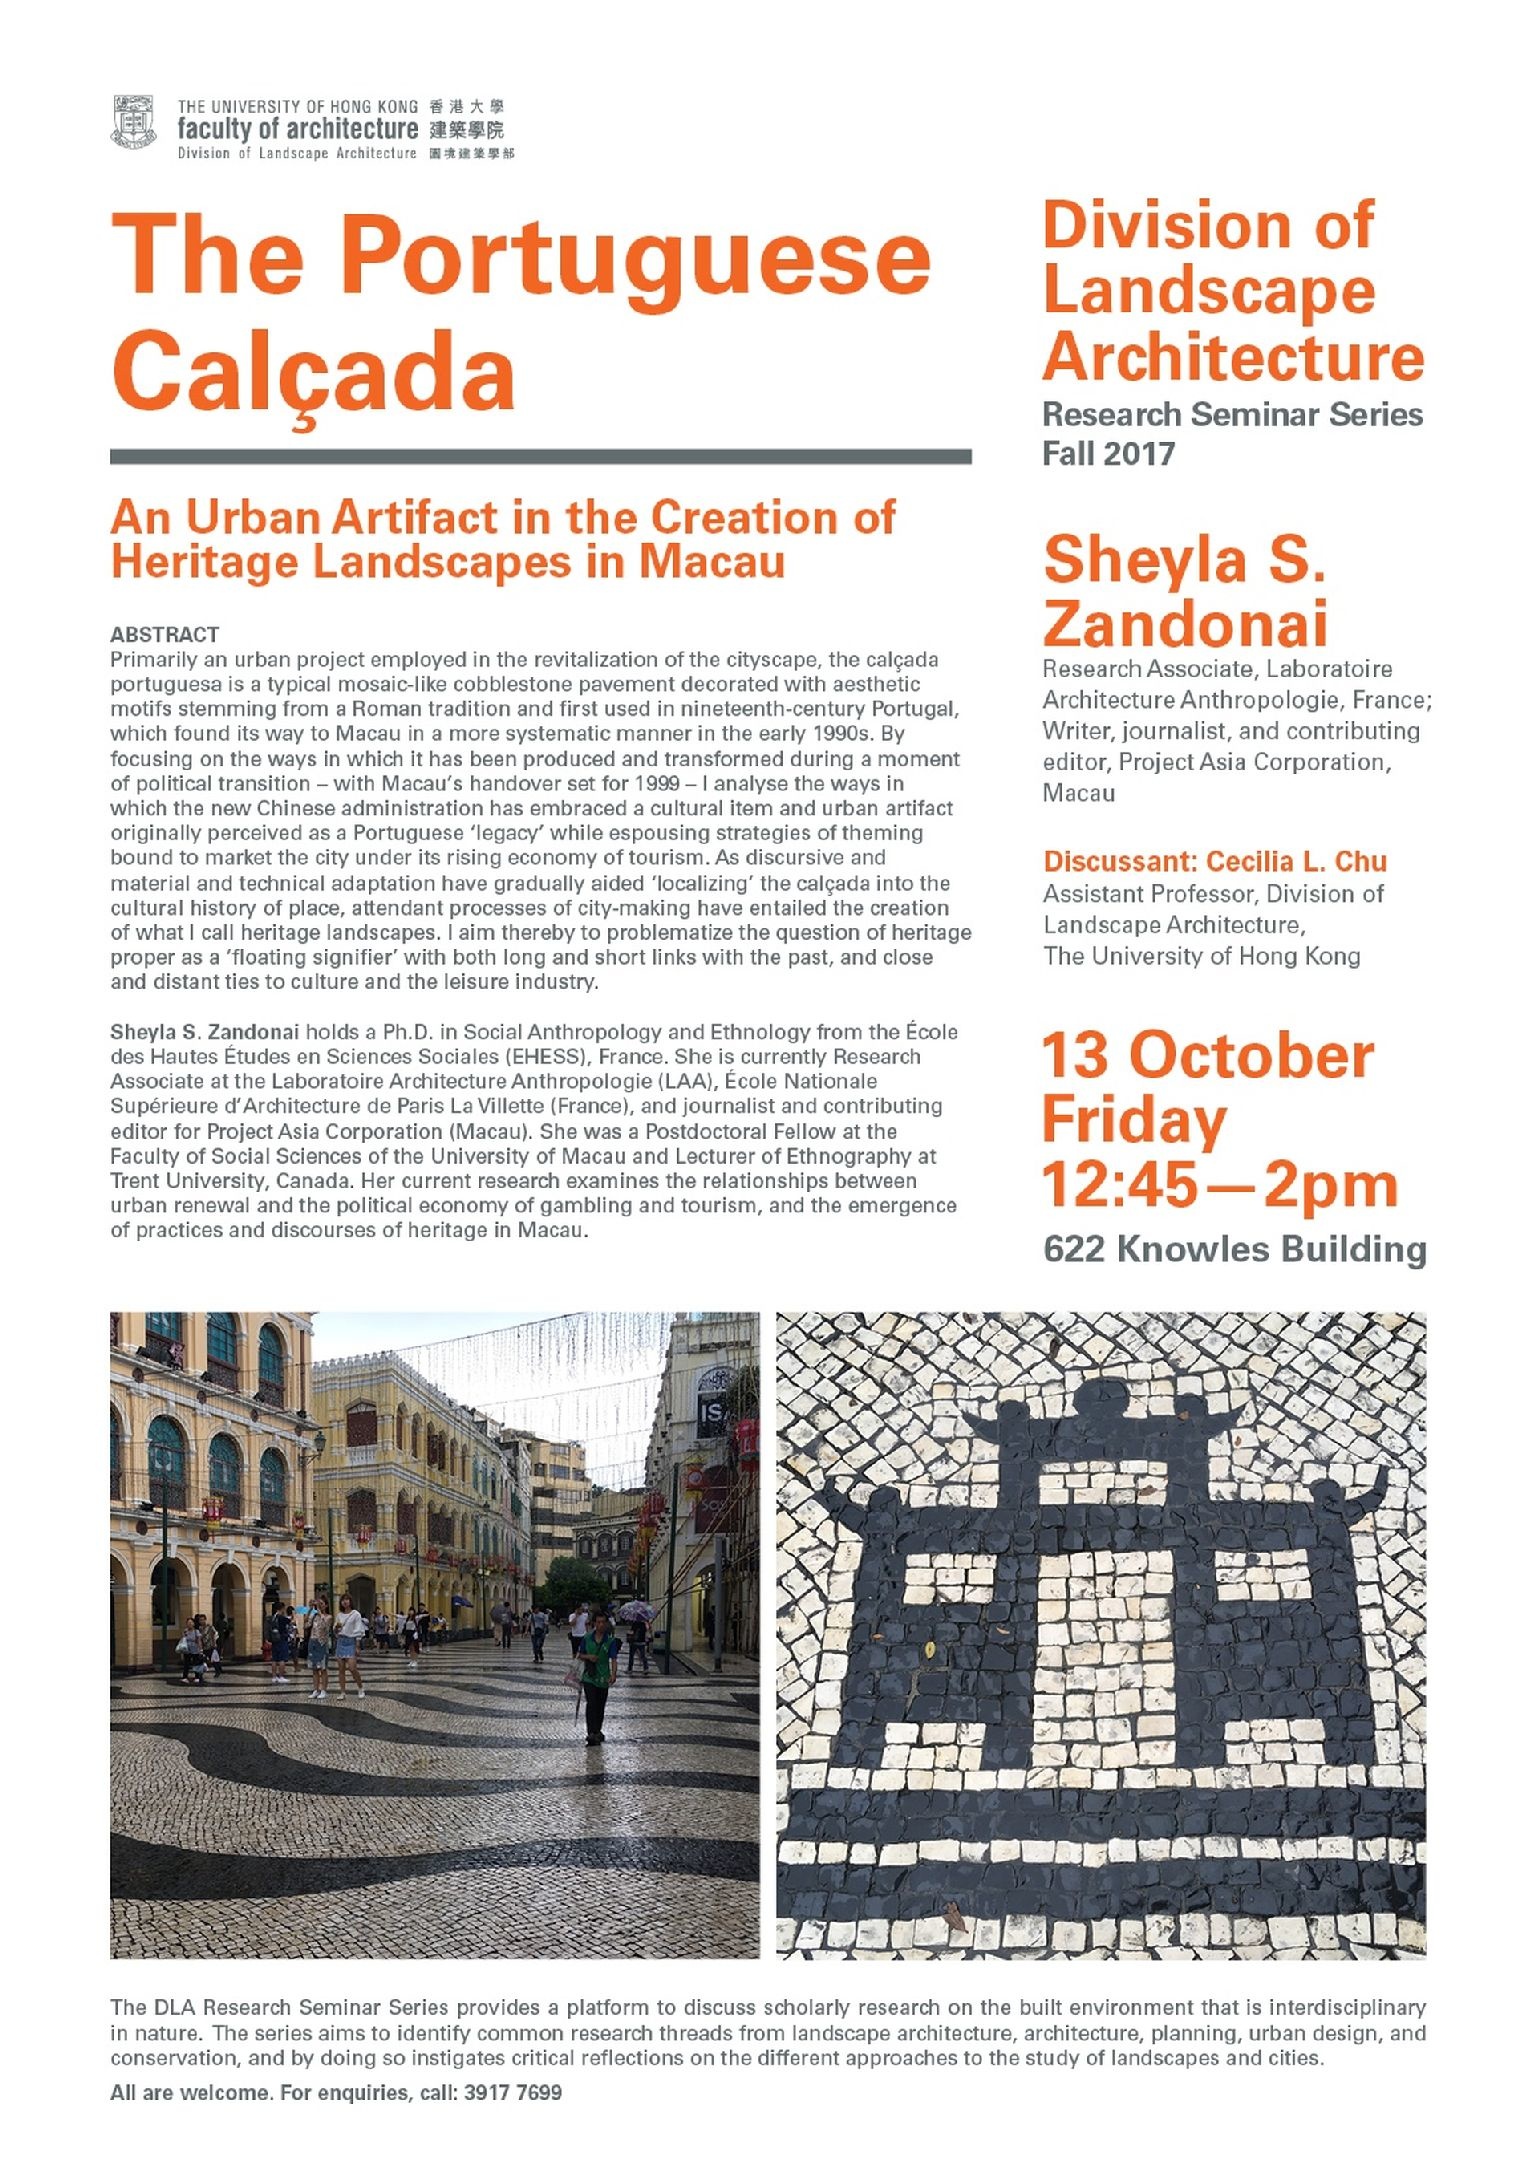 DLA Research Seminar - The Portuguese Calcada: An Urban Artifact in the Creation of Heritage Landscapes in Macau 